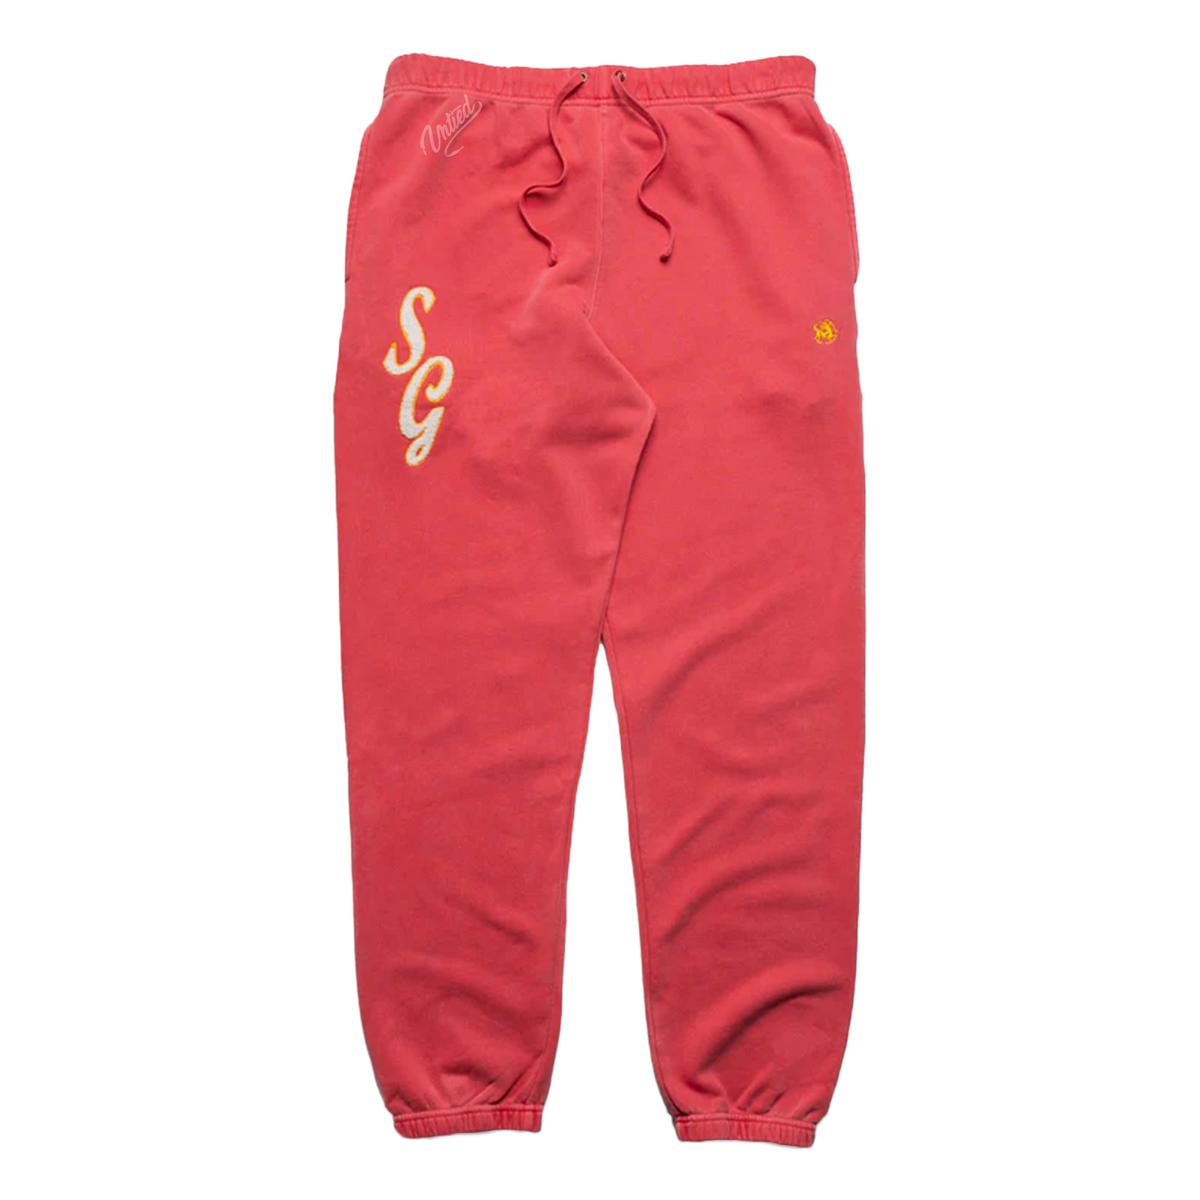 Sinclair Marinade Chenille Sweatpants "Red"